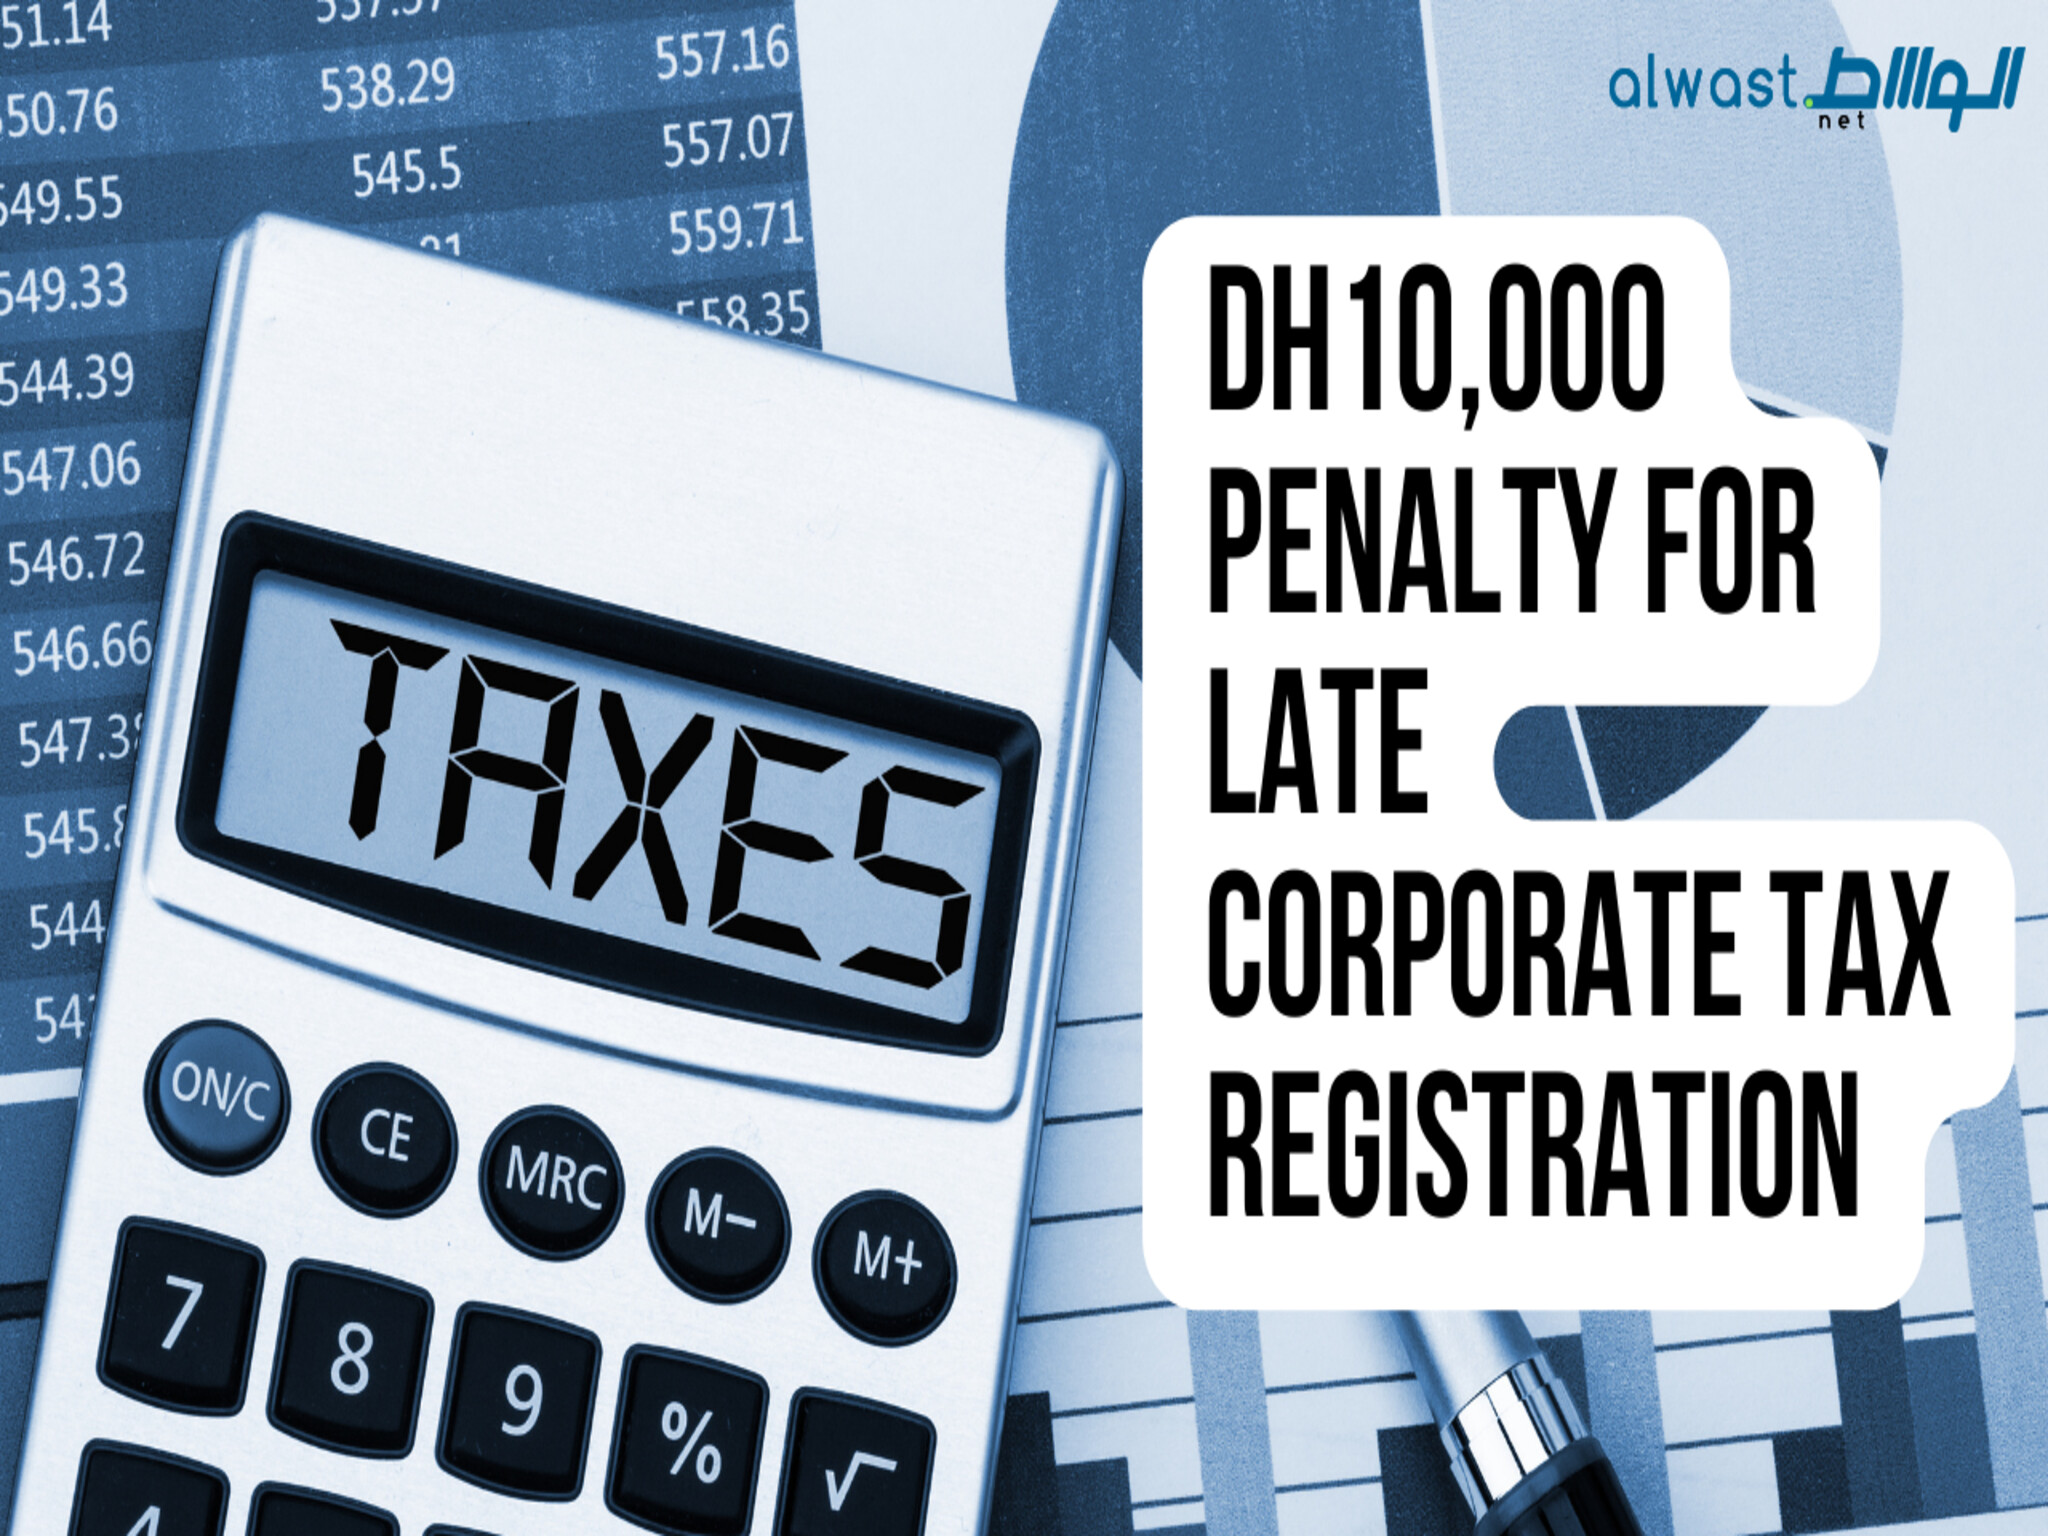 UAE: Firms Face Dh10,000 Fine, as Corporate Tax Registration Deadline Approaches